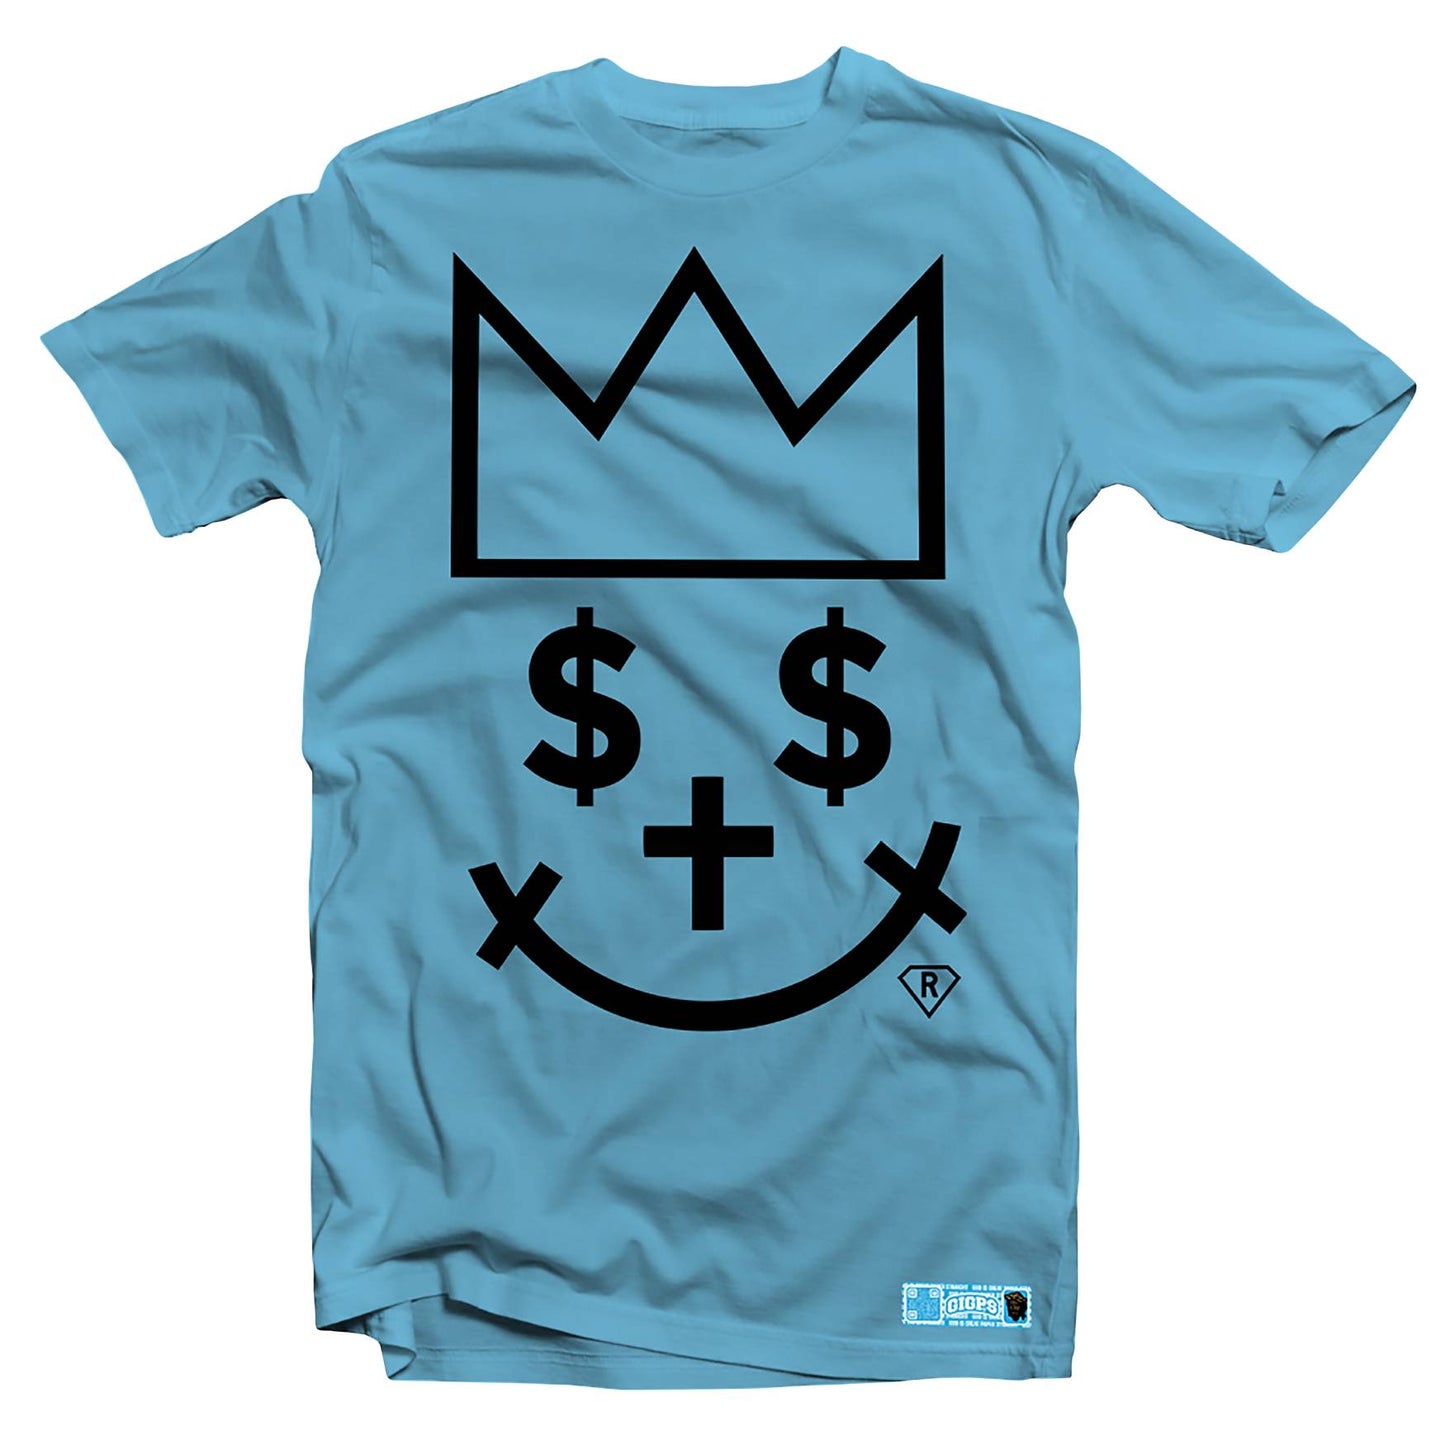 ALMIGHTY FACE TEE - BLUE